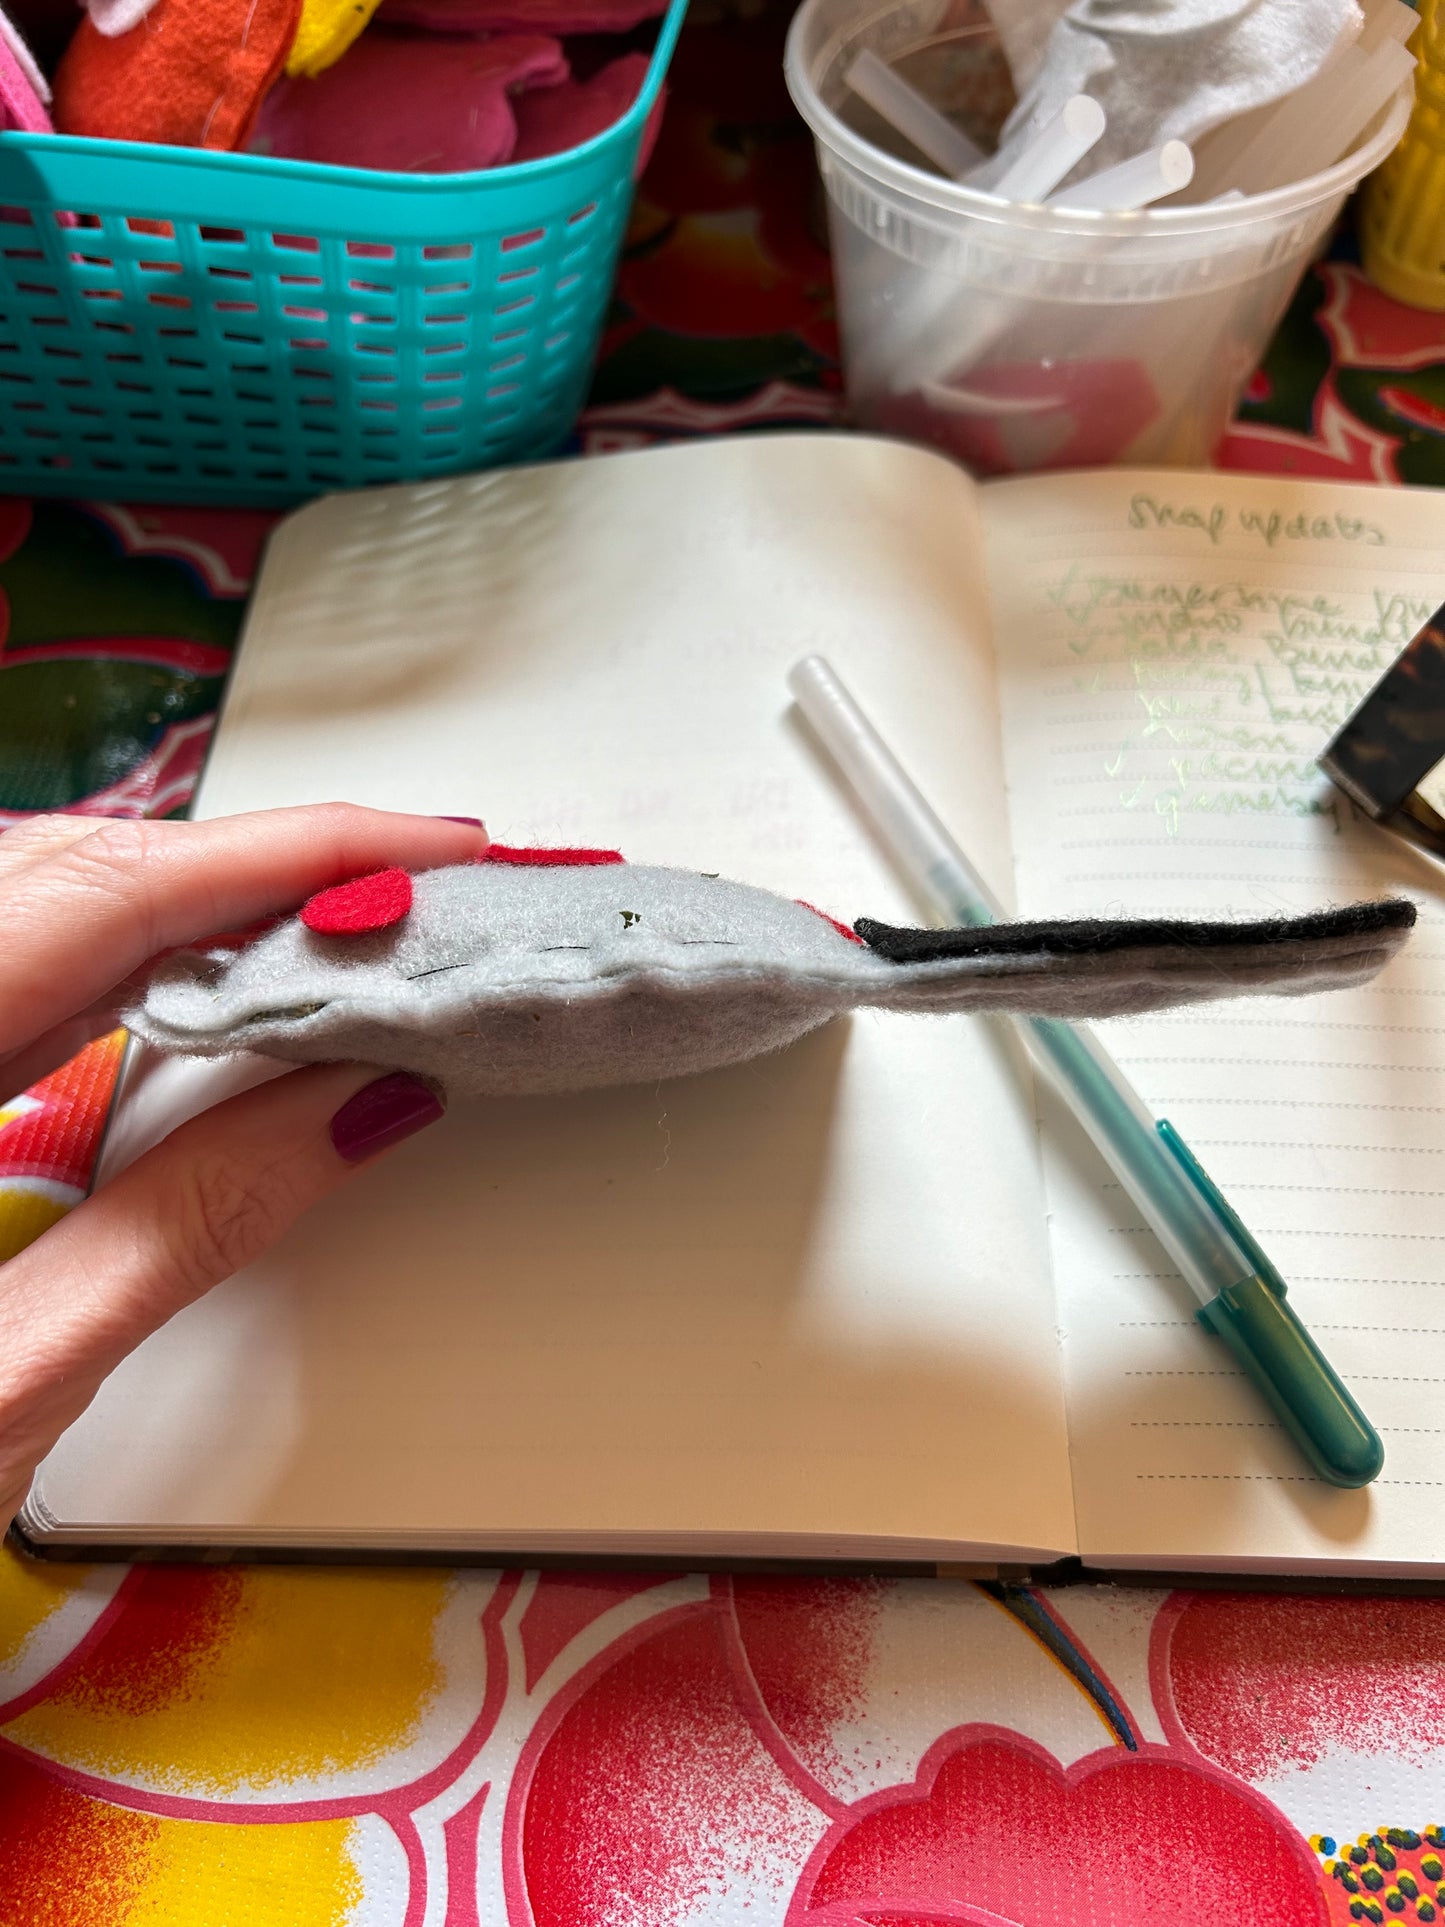 A person holding a catnip cat toy for sale. The item is made out of felt to resemble a cleaver. The view is of the side of the cat toy. There is a notebook and pen in the background.